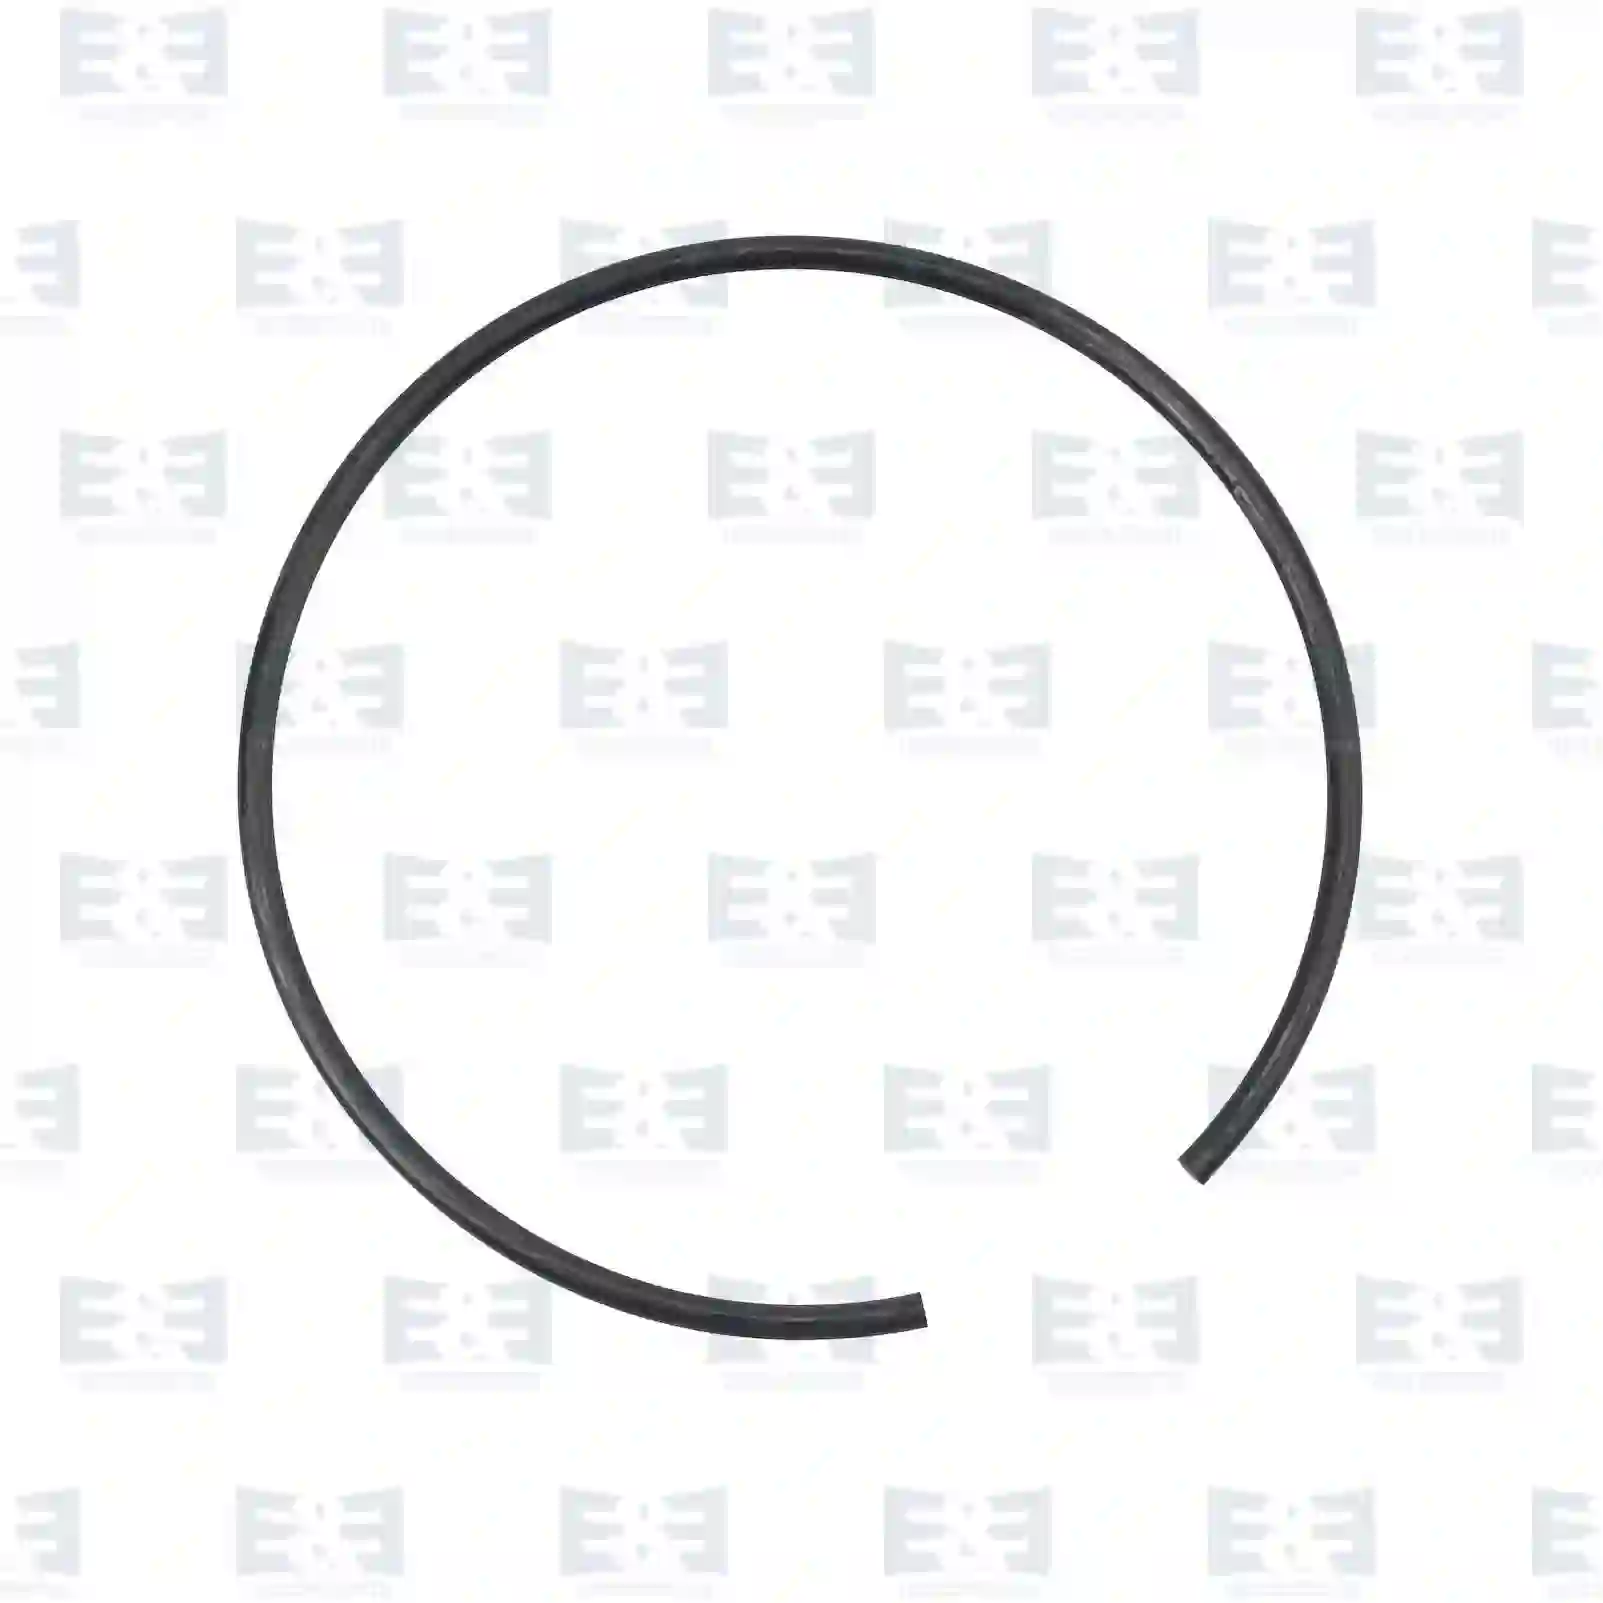  Grooved ring || E&E Truck Spare Parts | Truck Spare Parts, Auotomotive Spare Parts